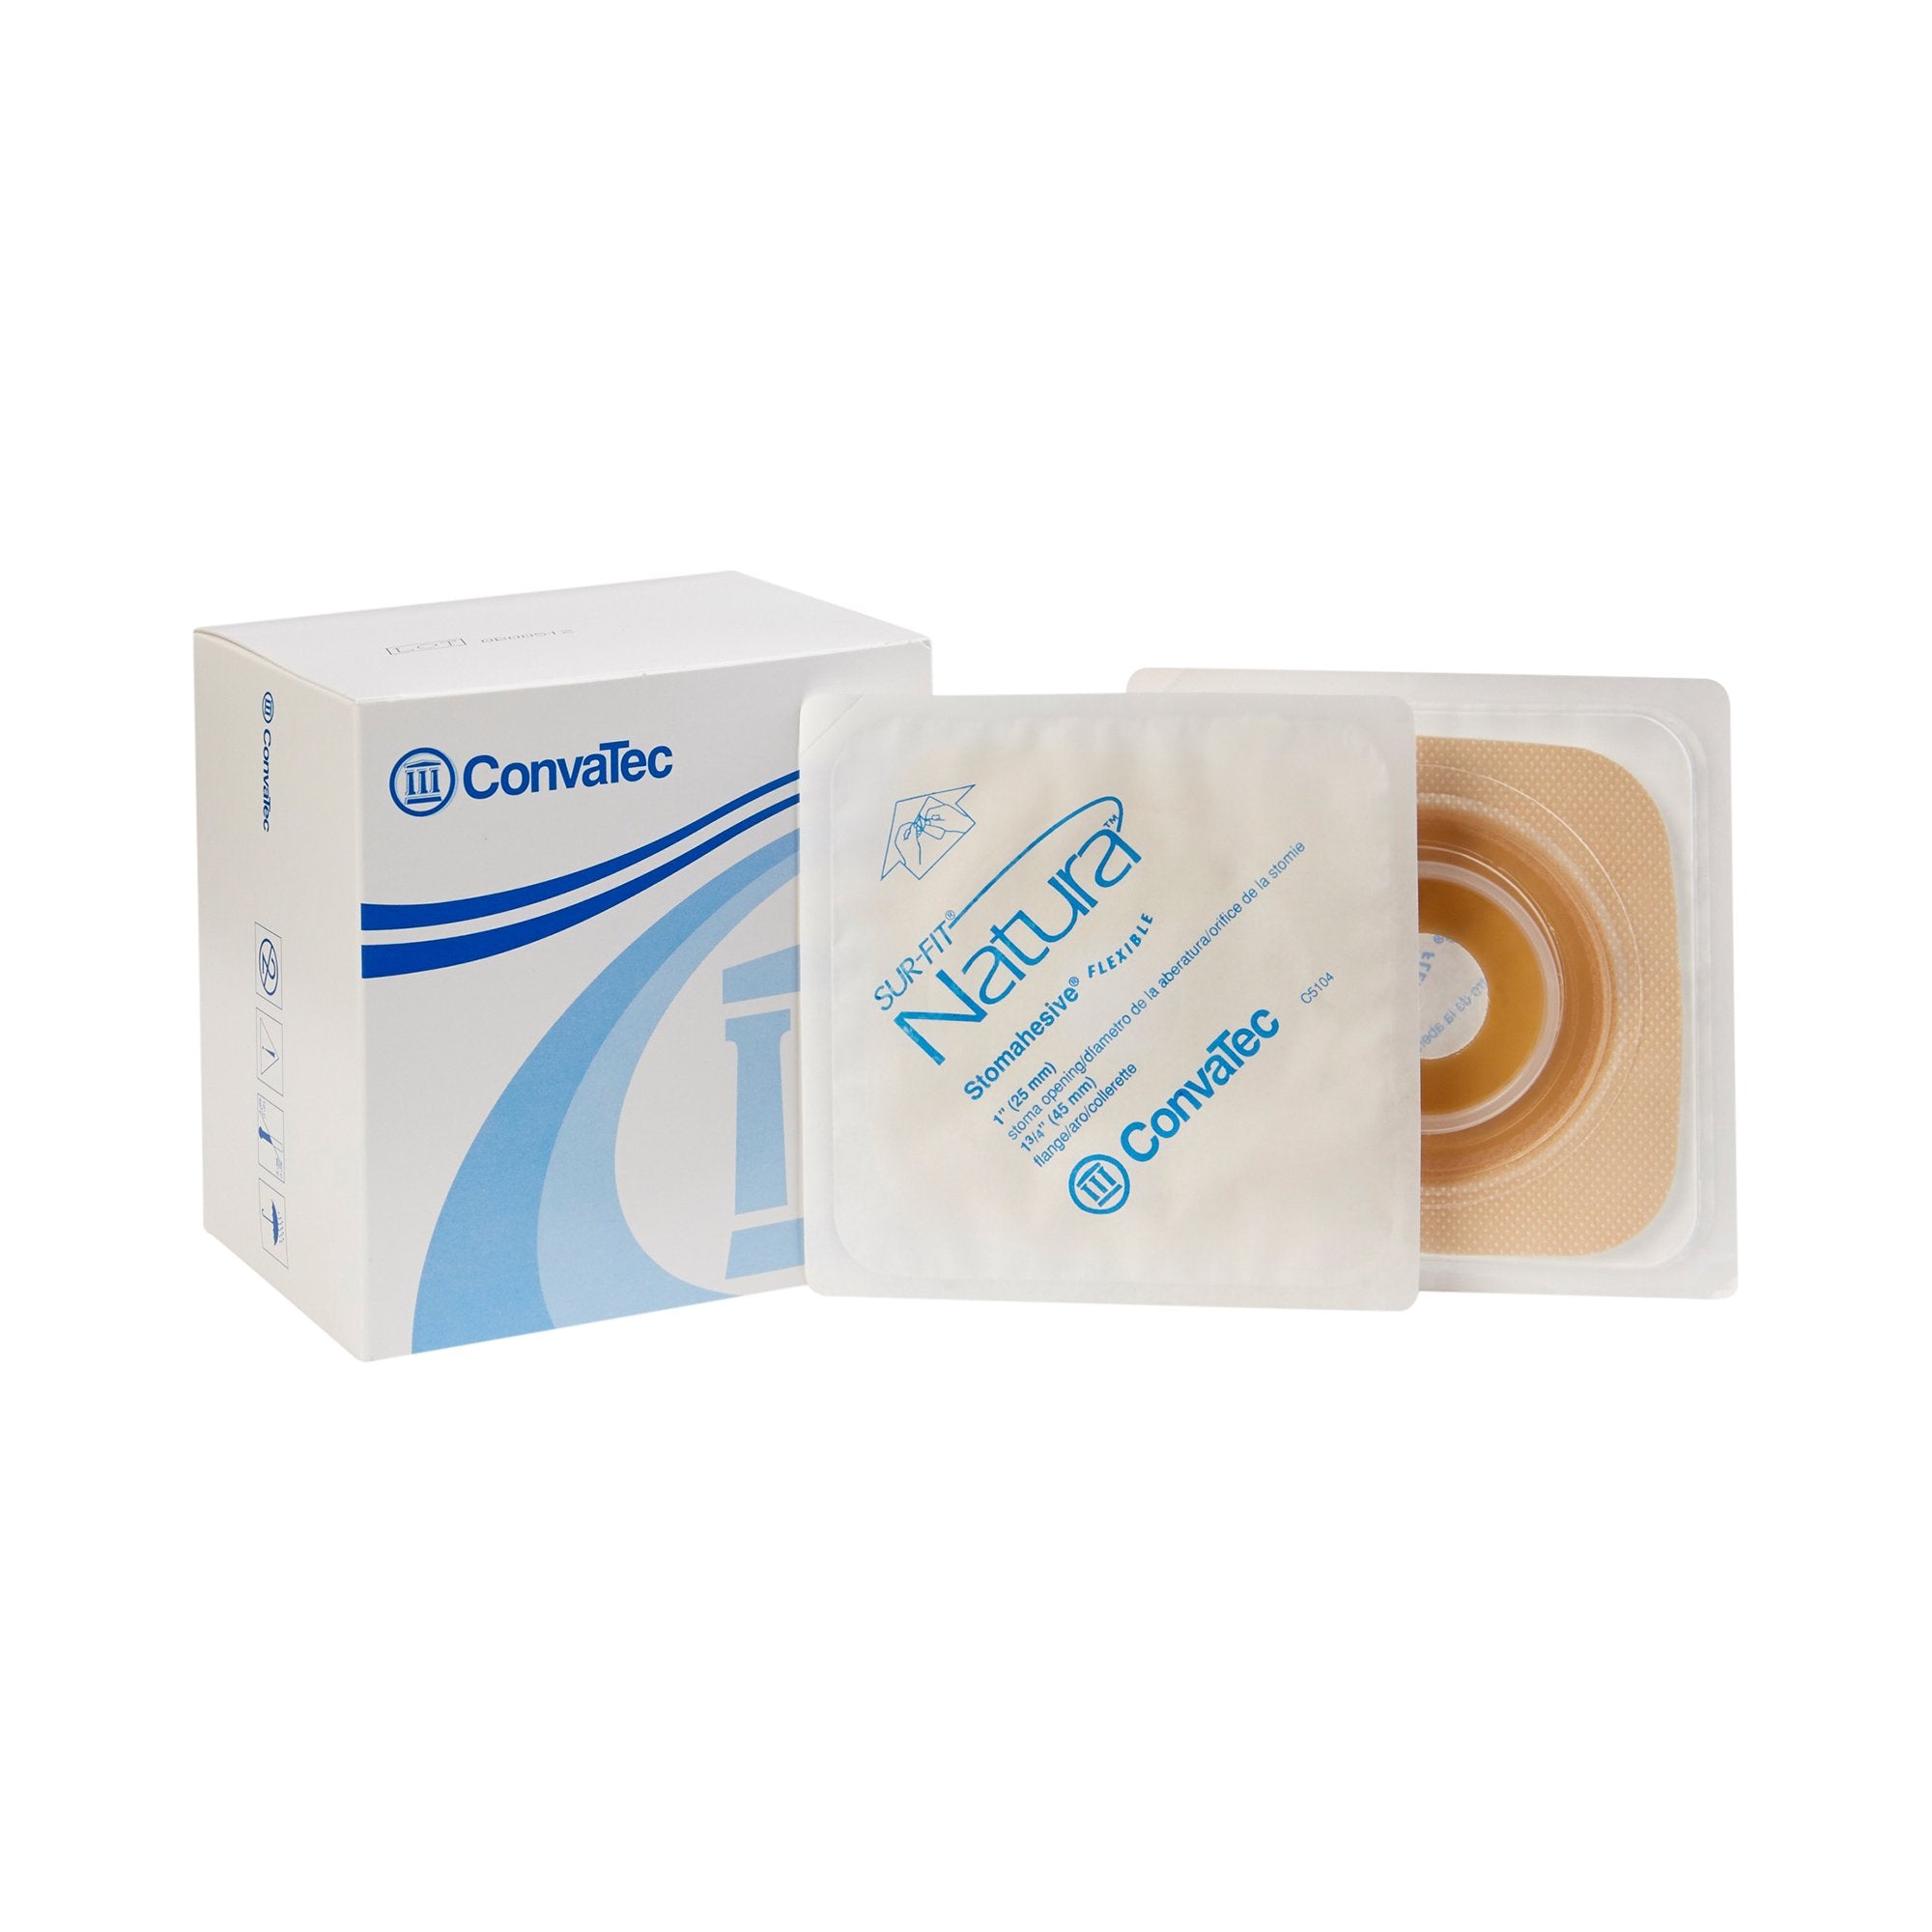 Sur-Fit Natura? Colostomy Barrier With 1 Inch Stoma Opening, Tan, 10 ct